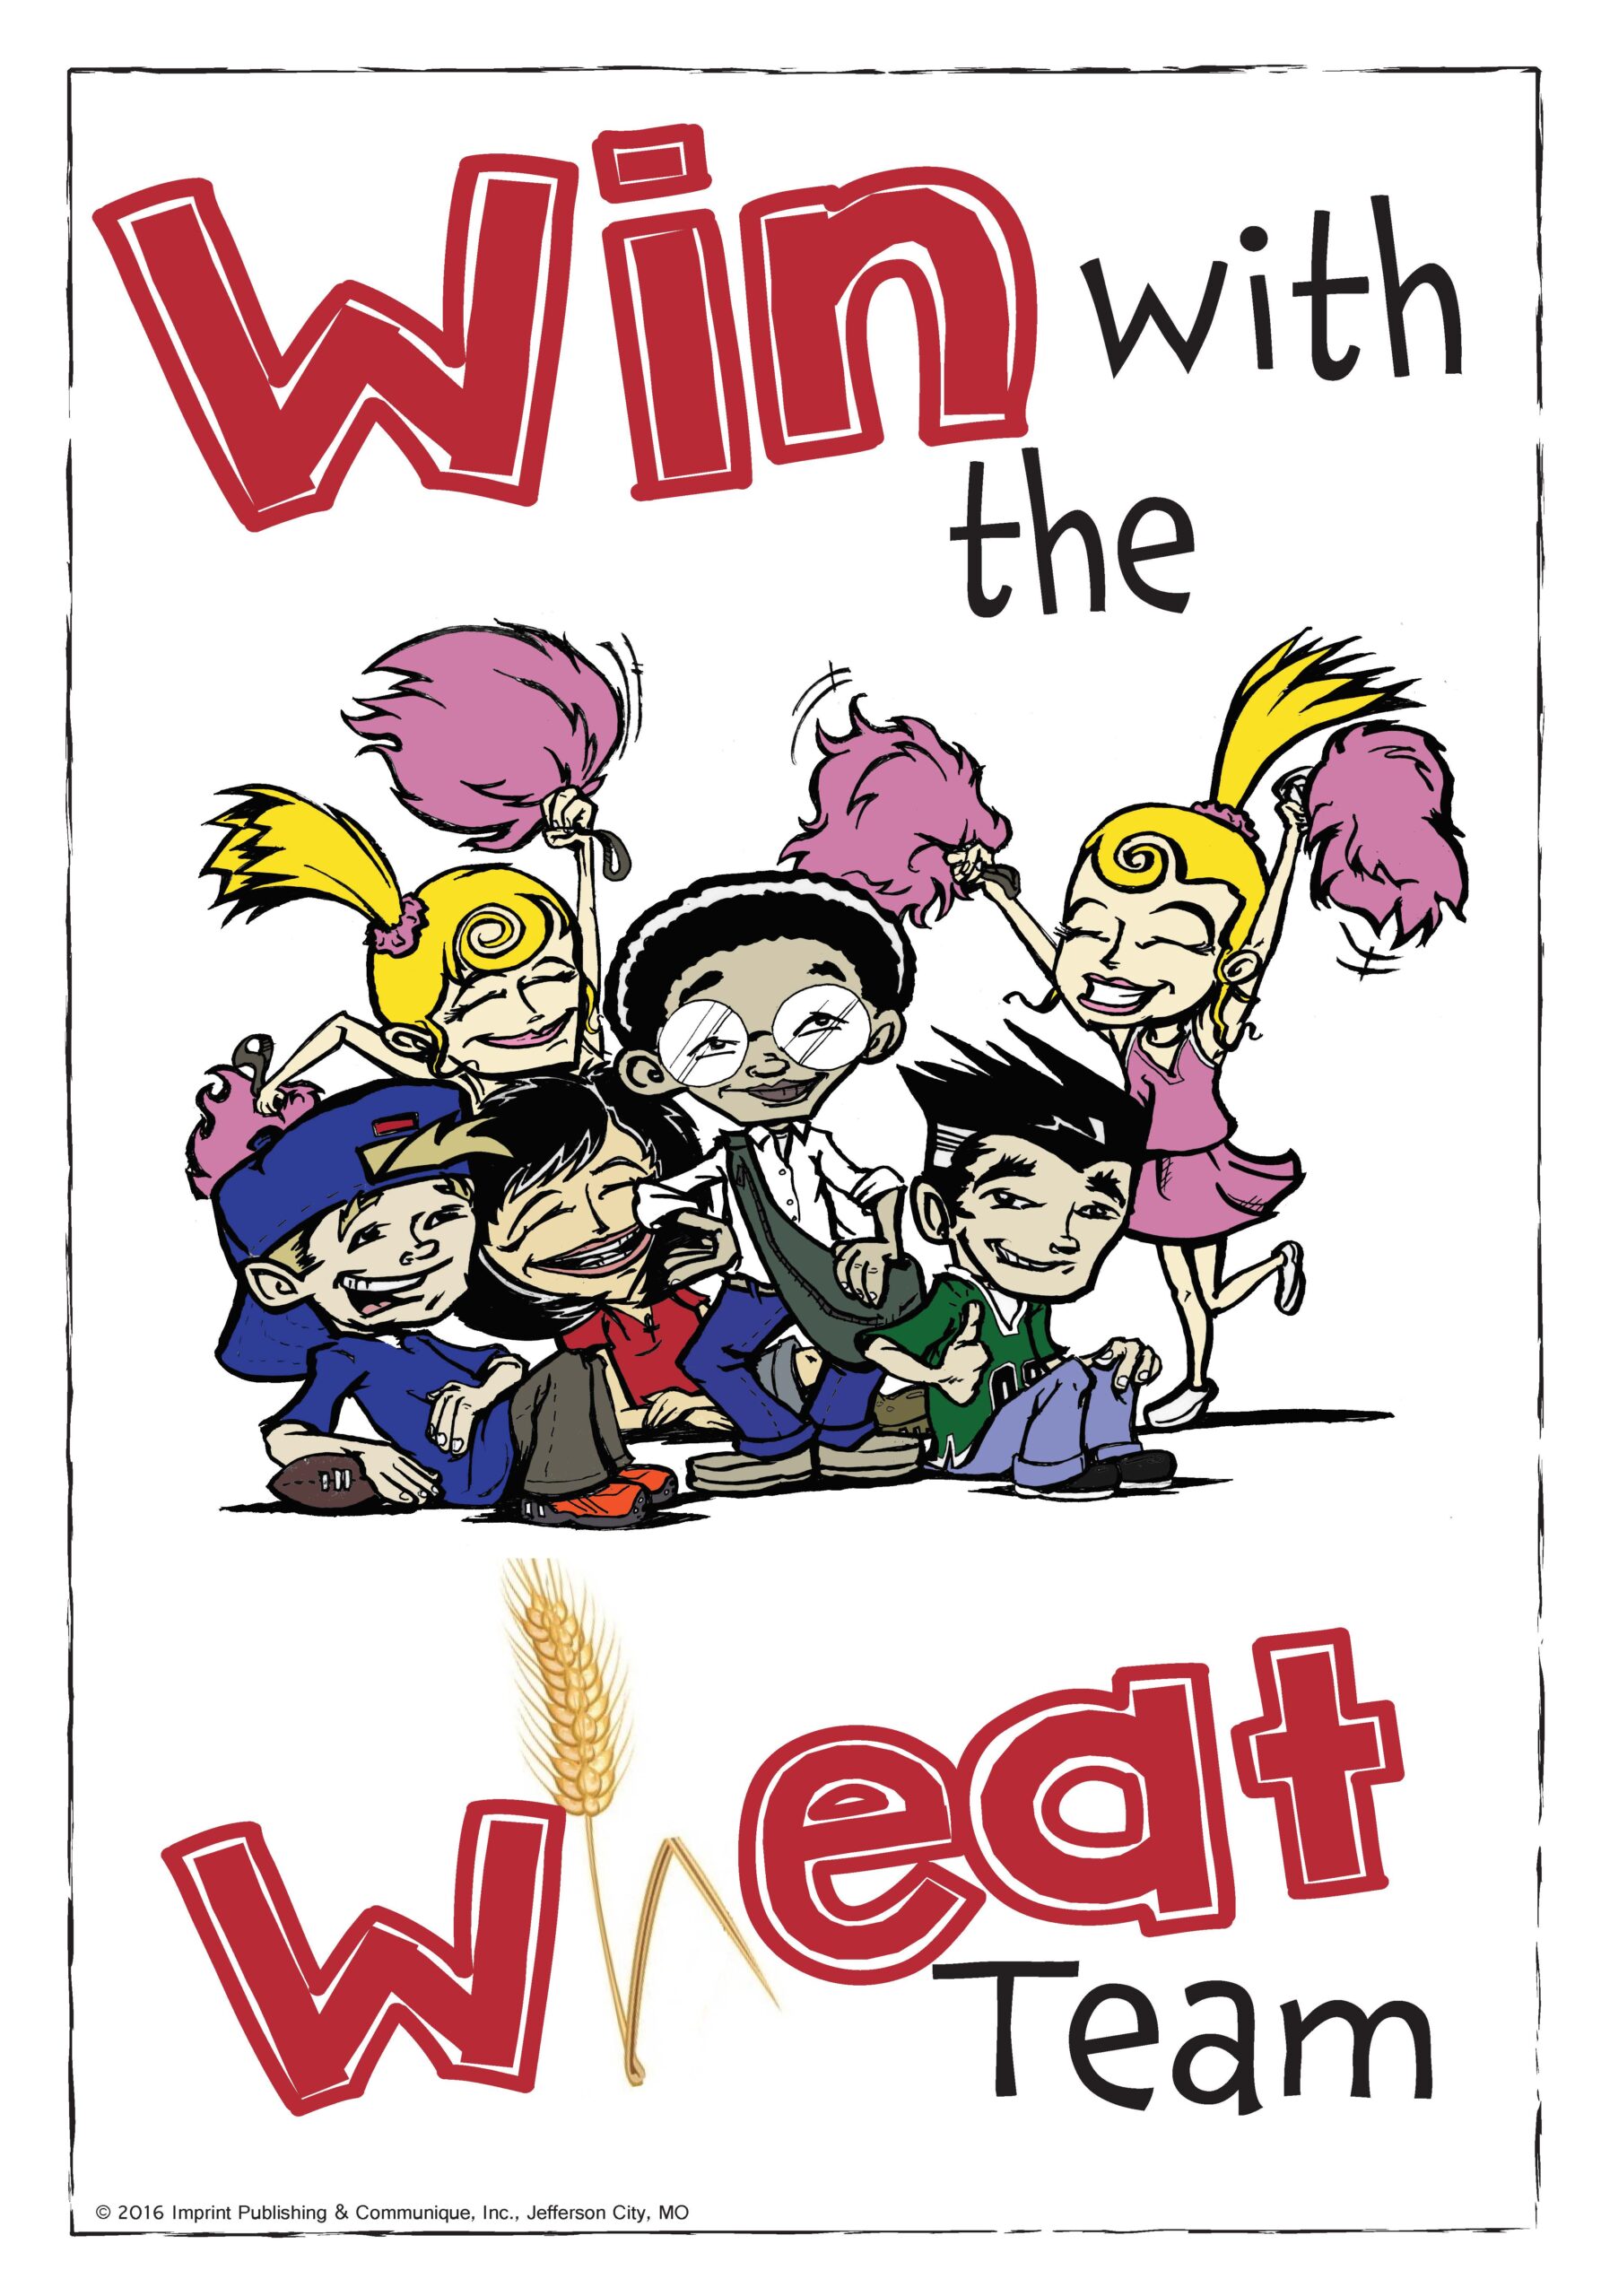 Win With the wheat team